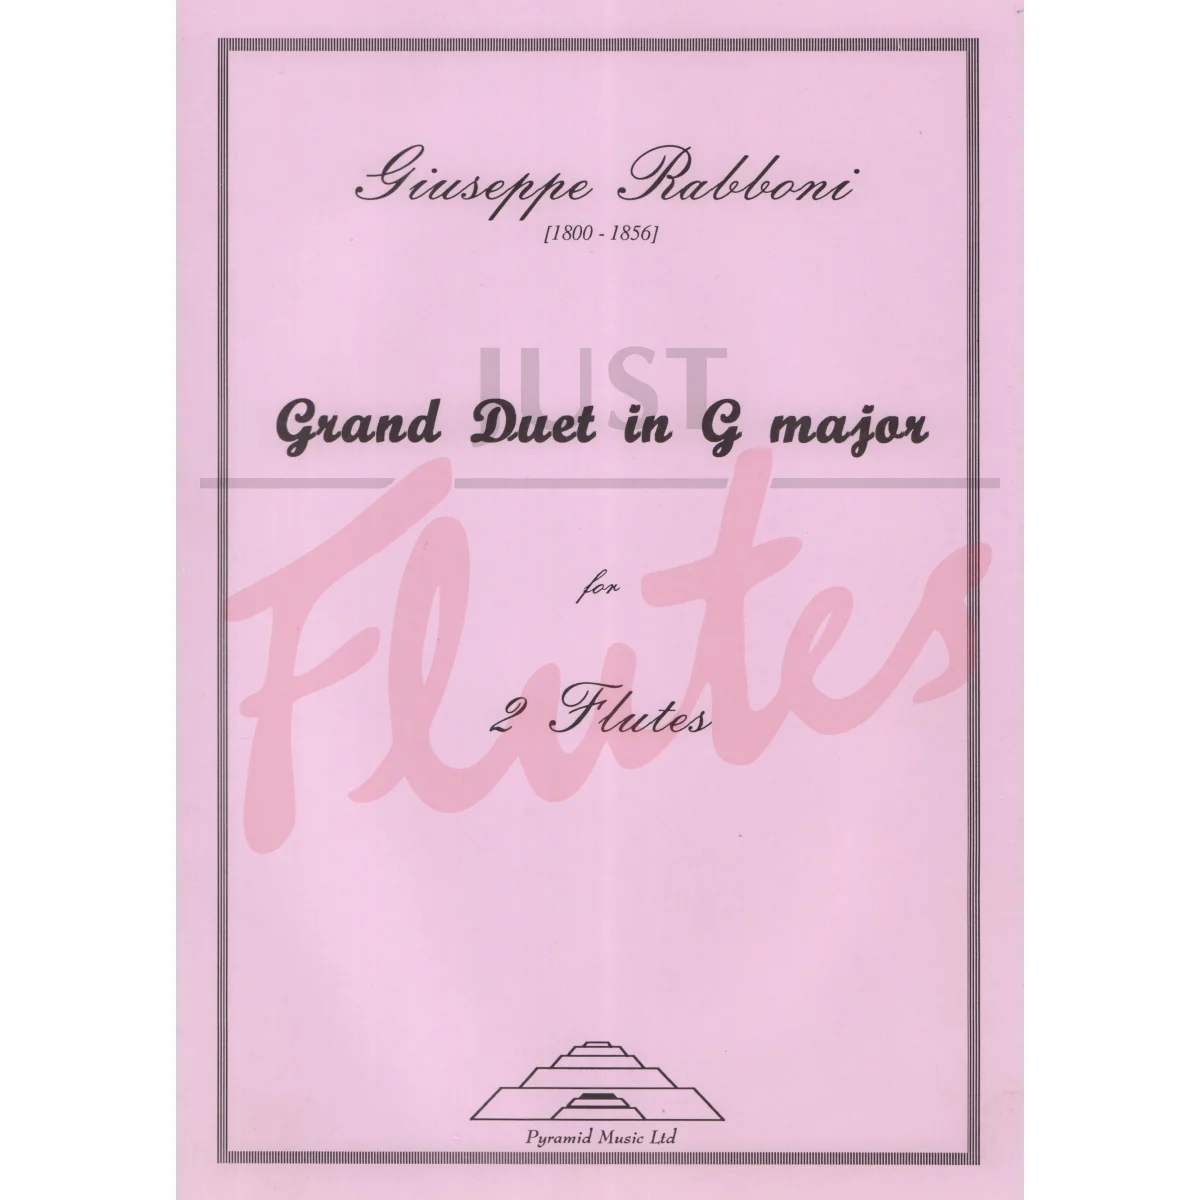 Grand Duet in G major for Two Flutes